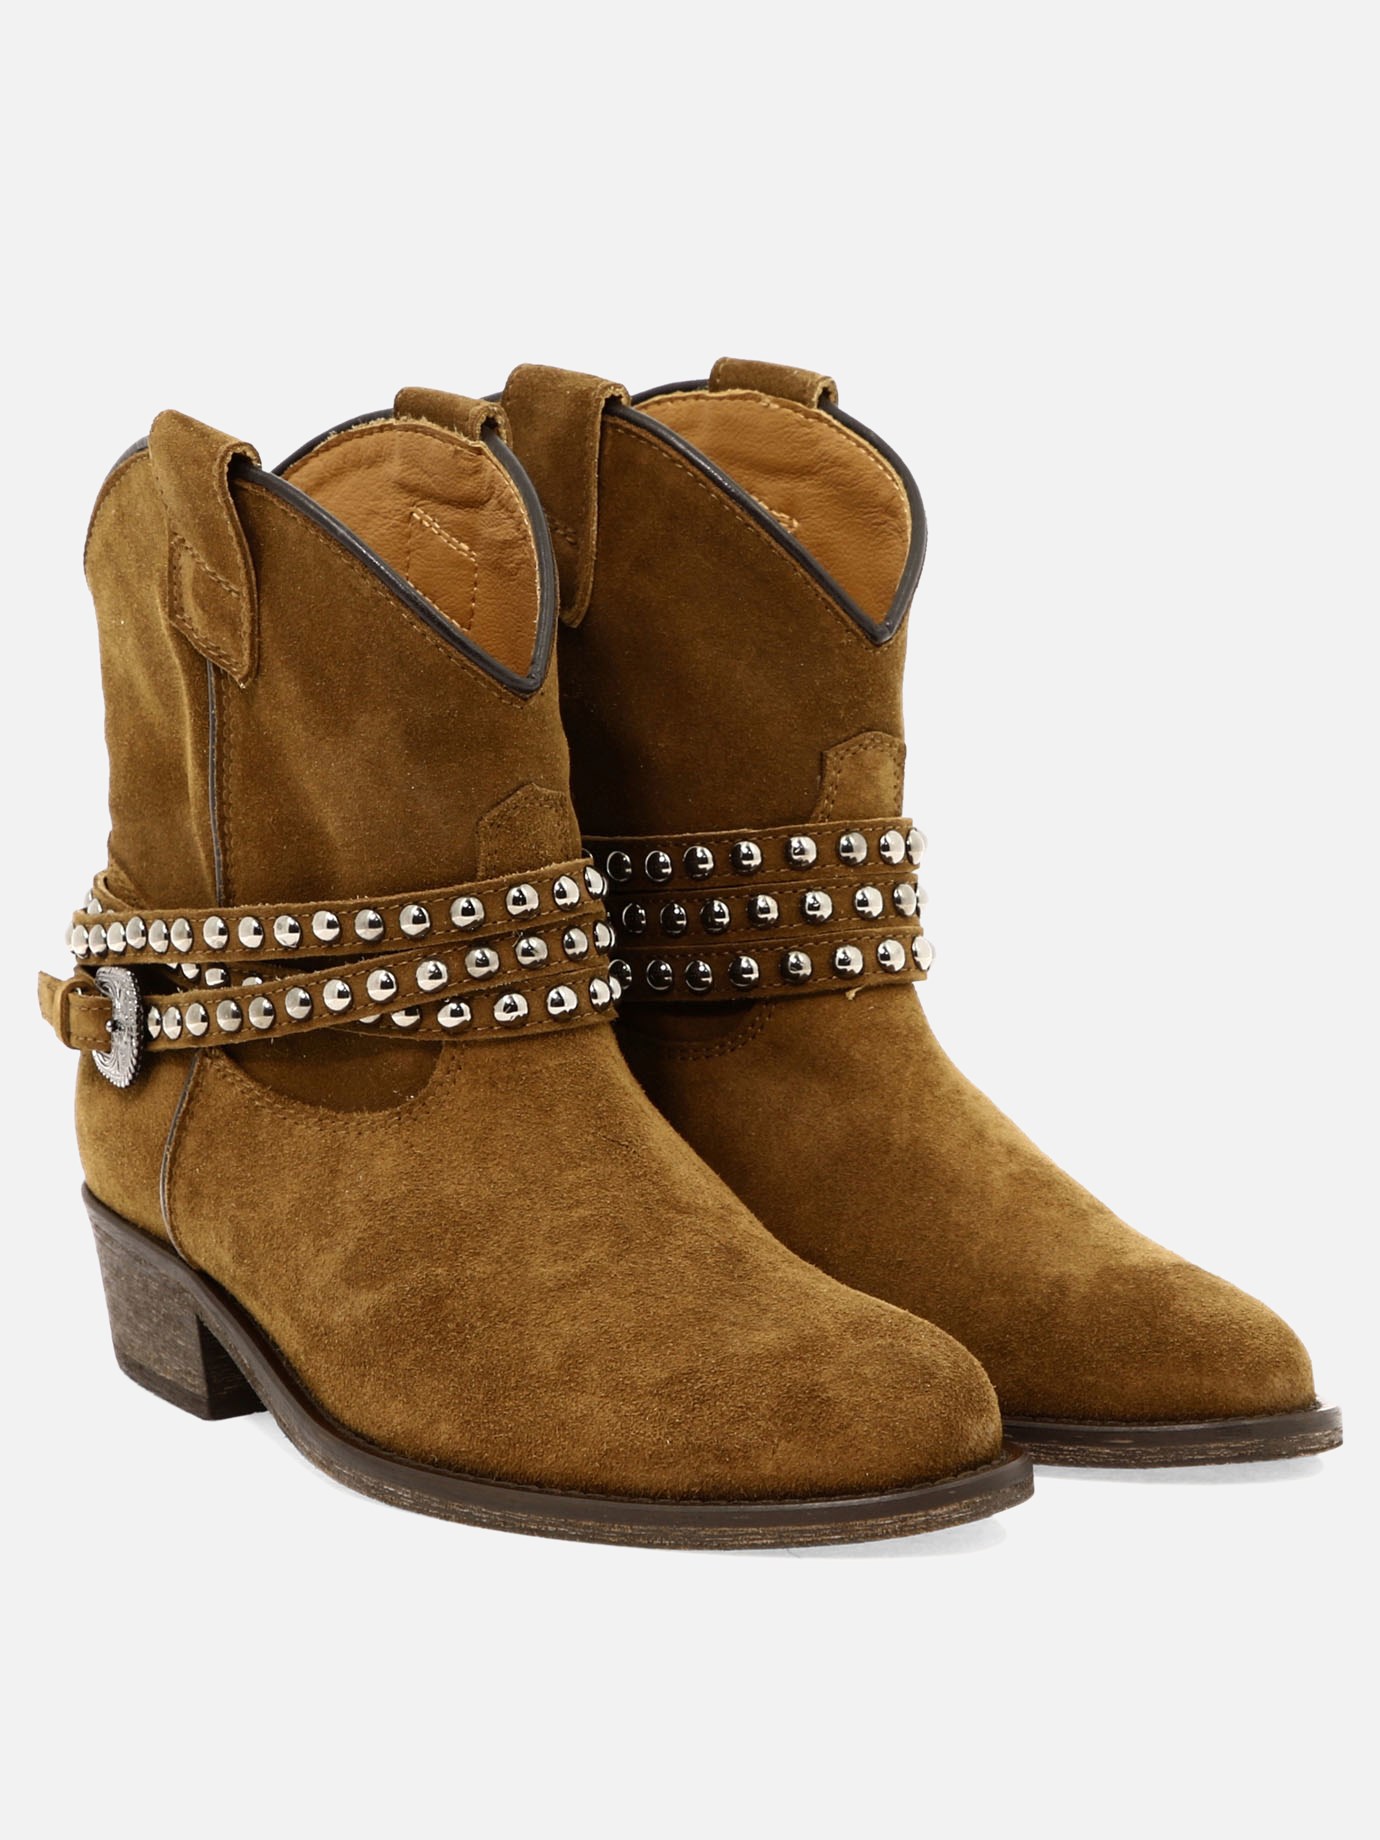 Studded boots by Via Roma 15